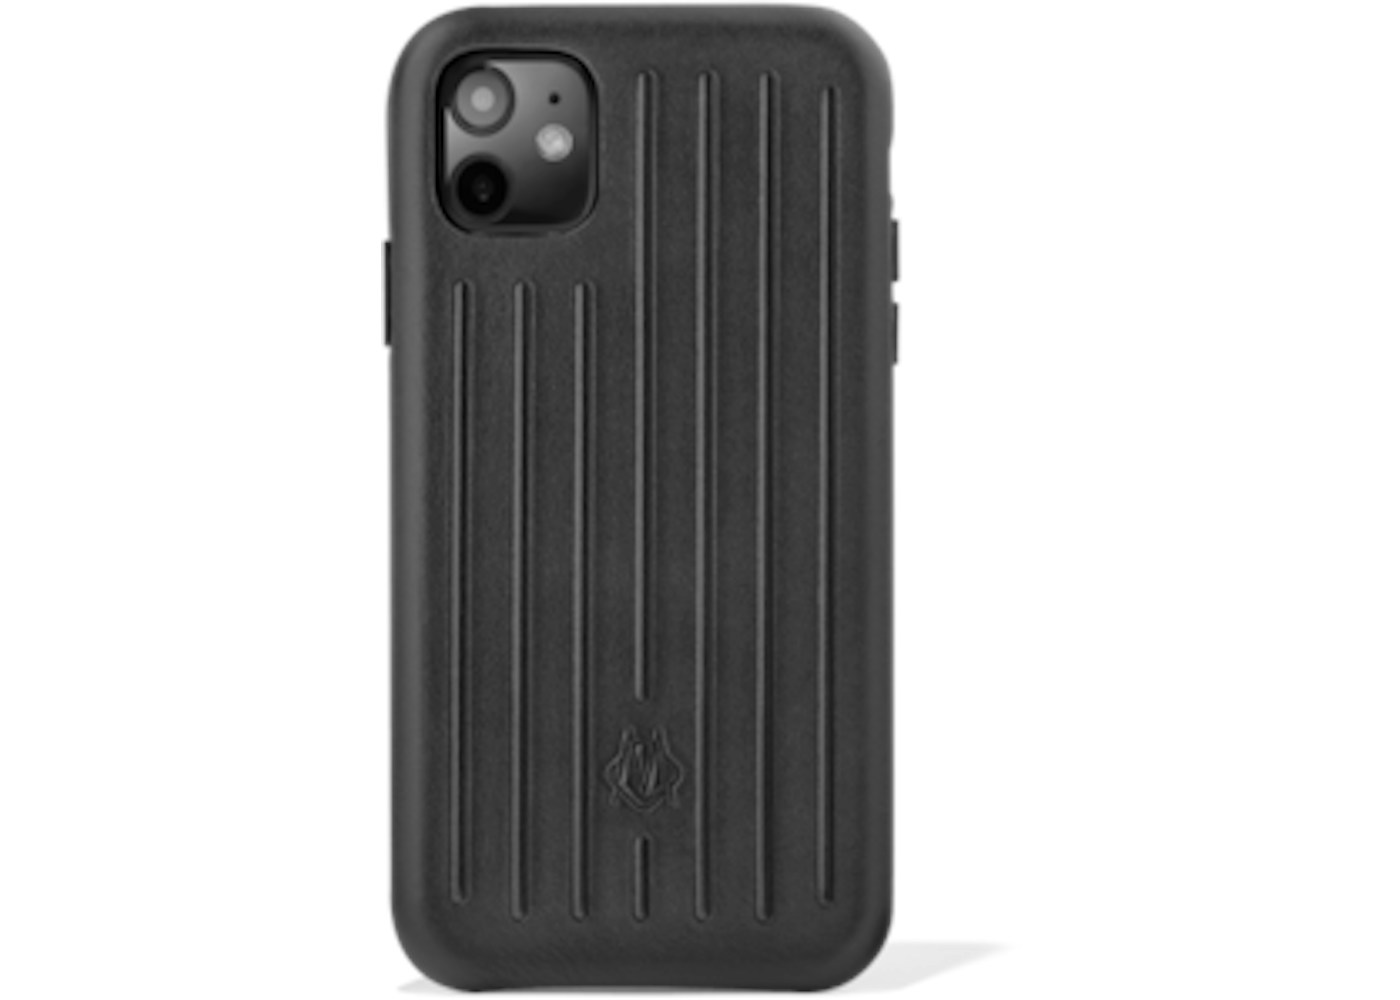 Rimowa Leather Black Case for iPhone 11 in Polycarbonate